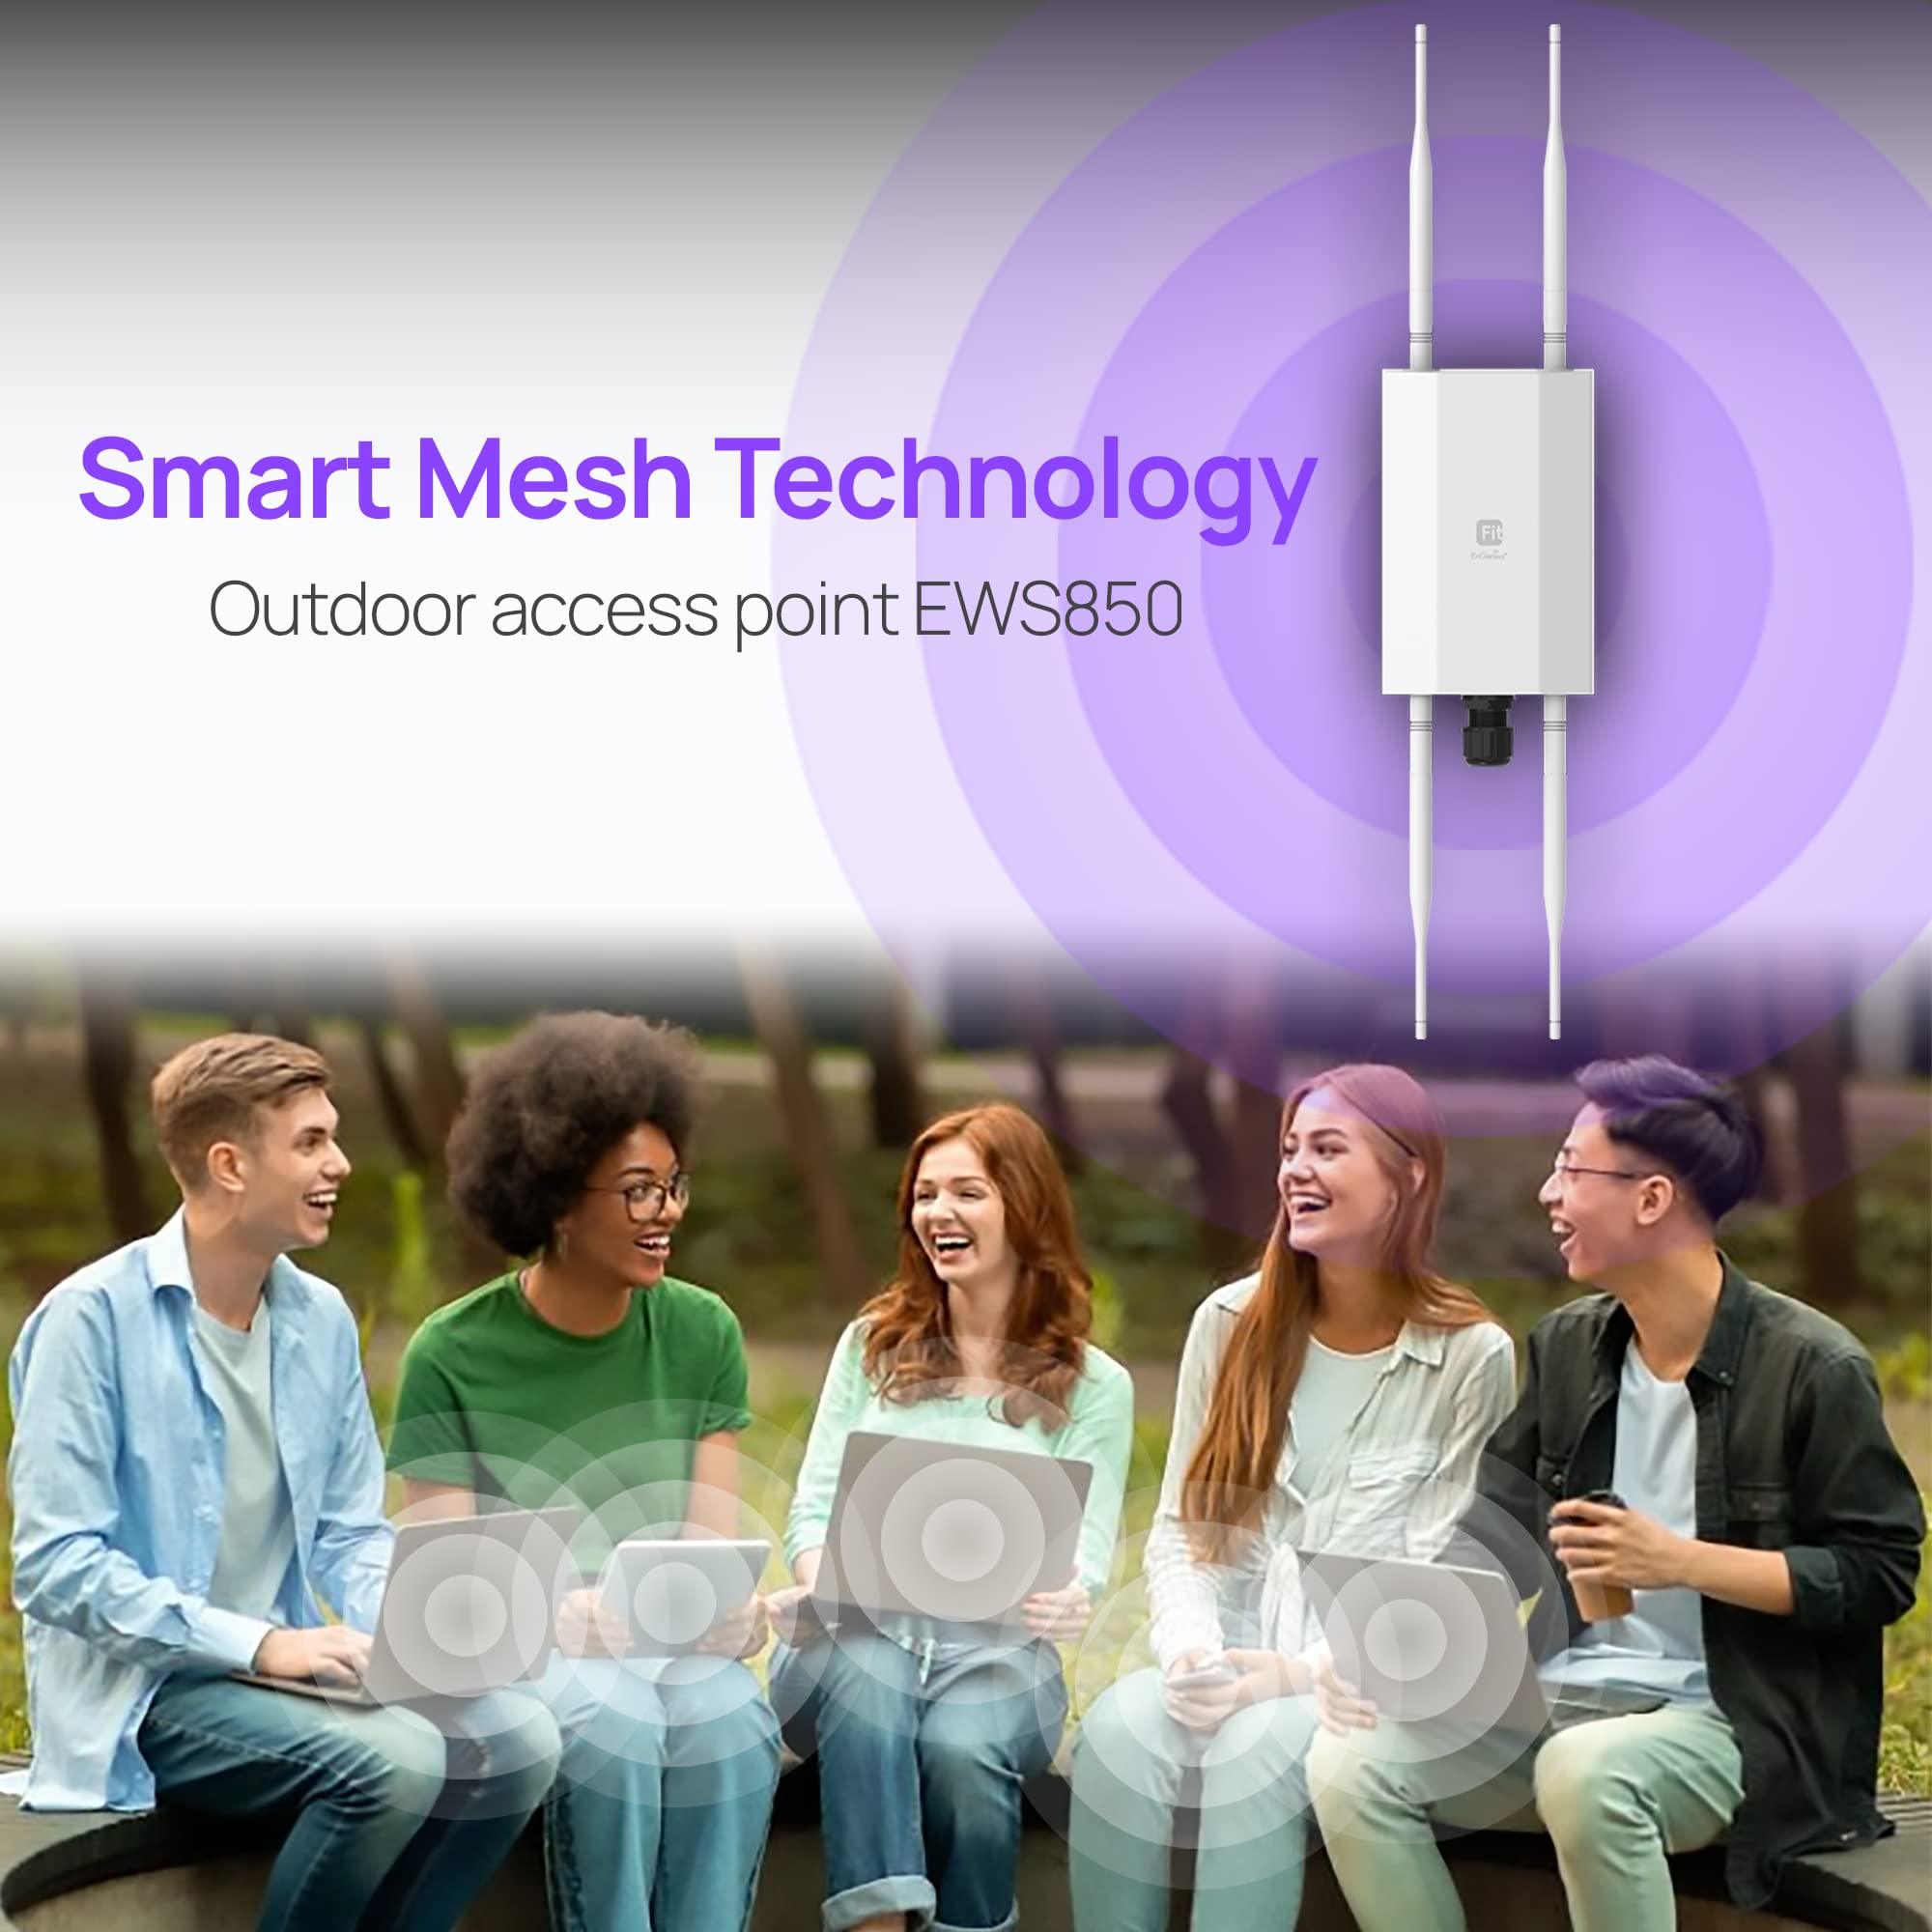 EnGenius Fit Managed EWS850-FIT Wi-Fi 6 (11ax) 2x2 Outdoor Access Point